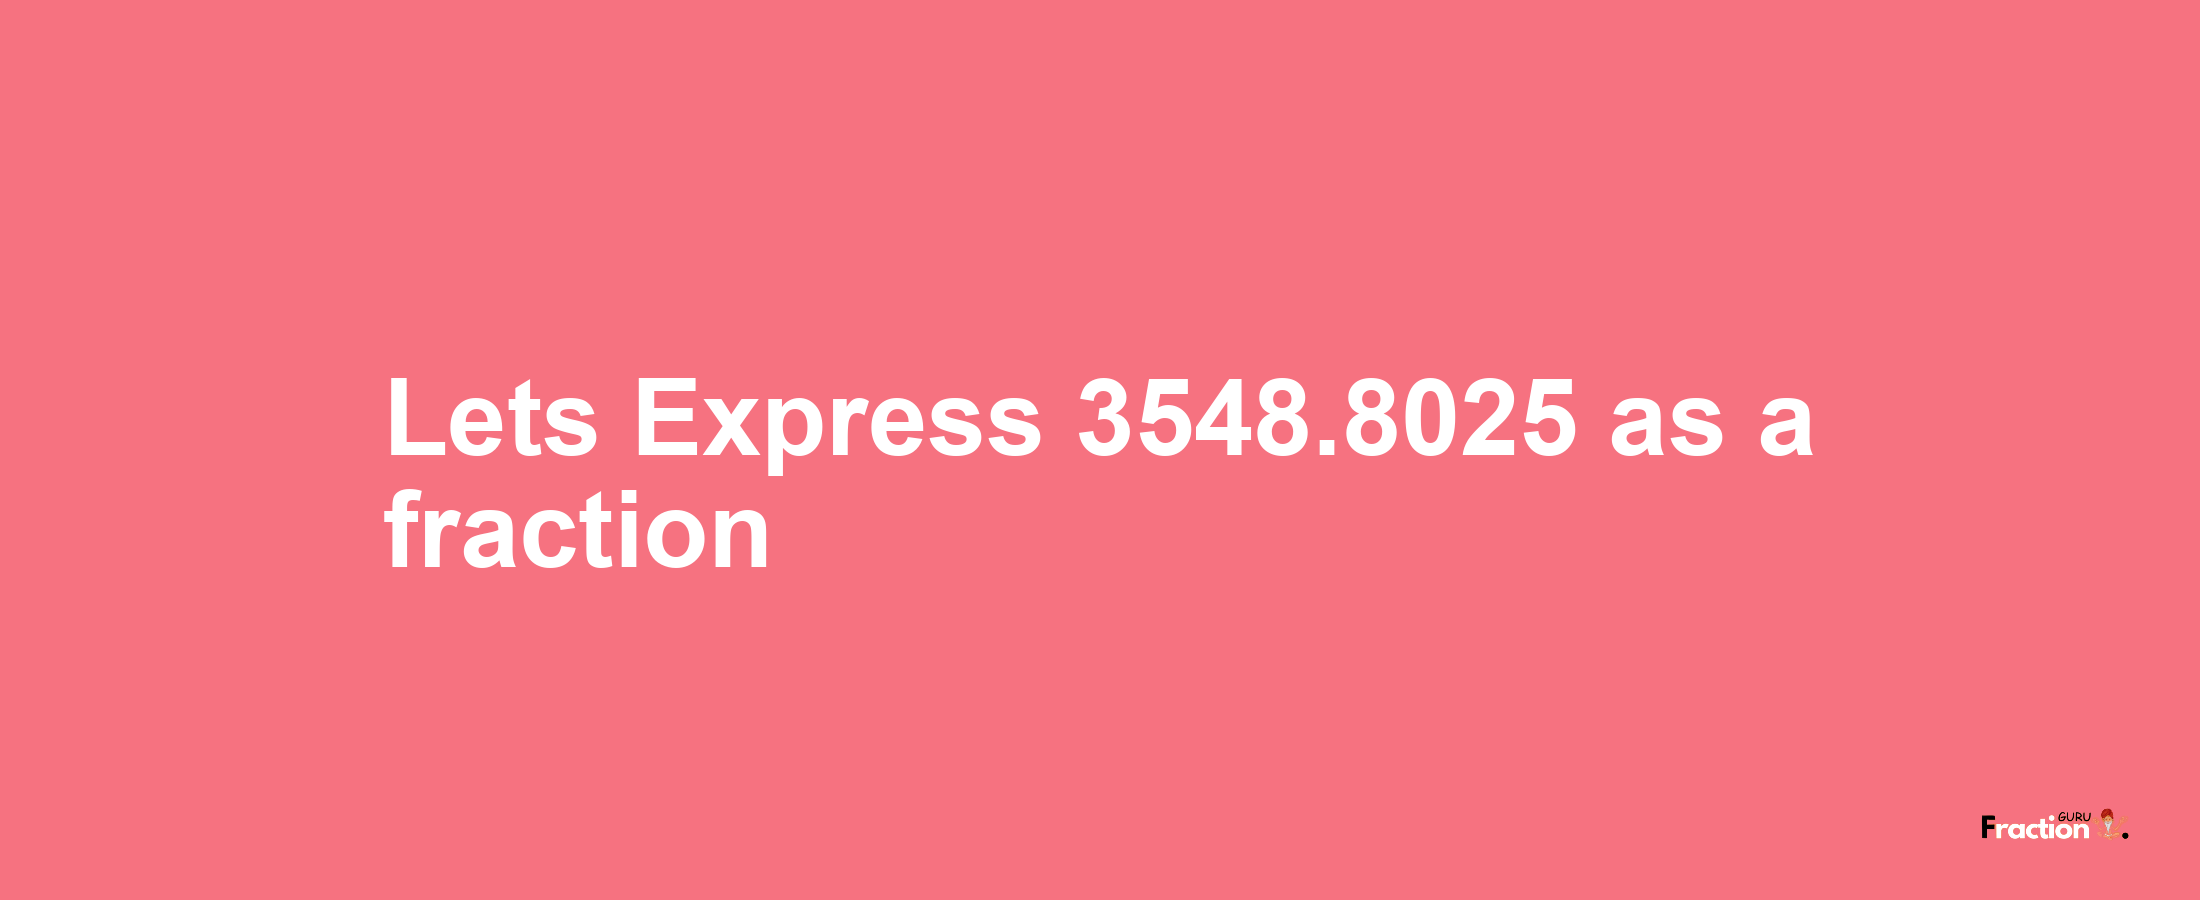 Lets Express 3548.8025 as afraction